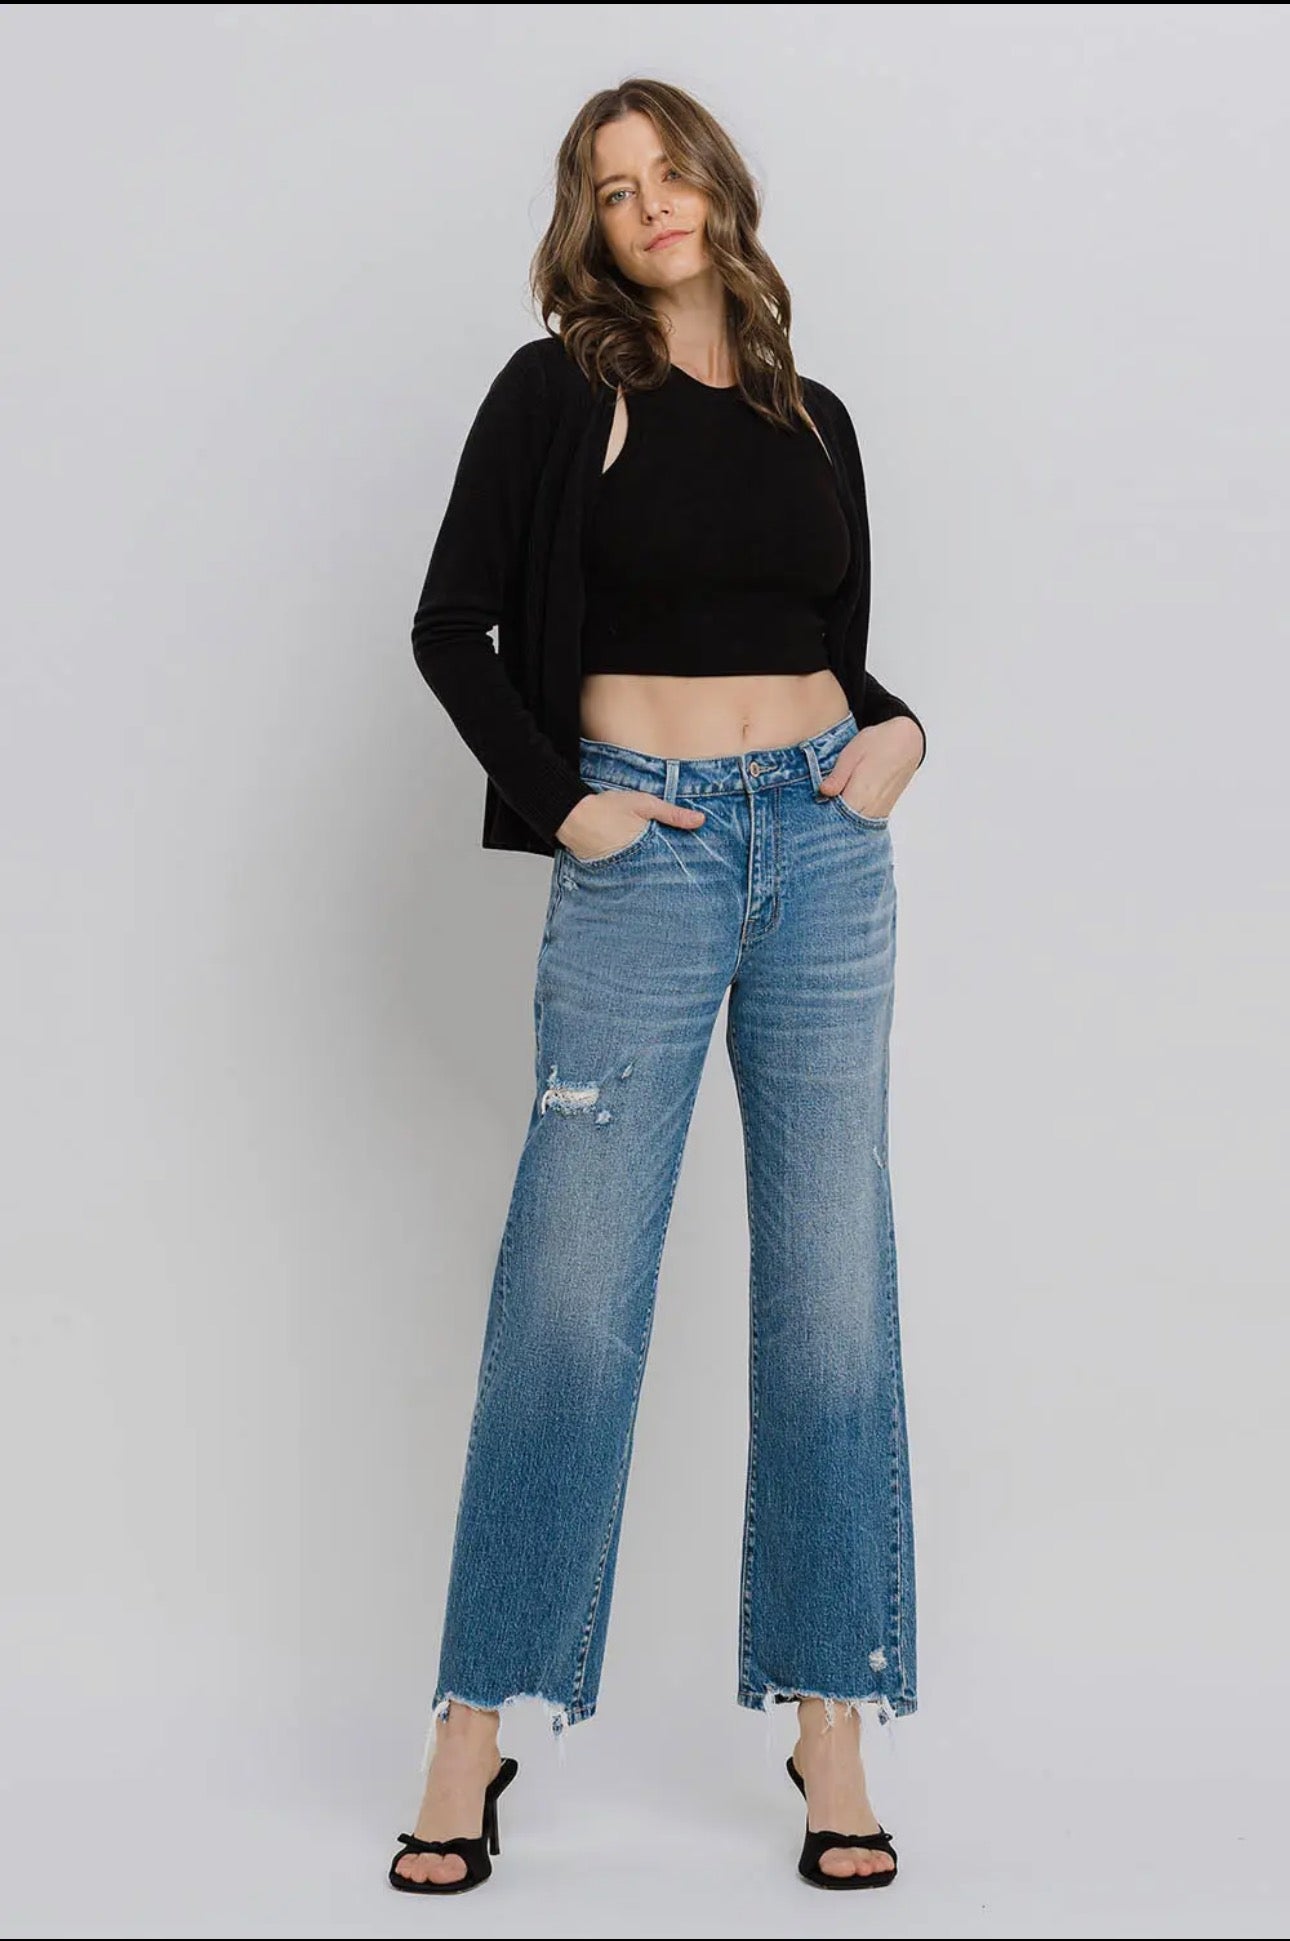 The 90s BLOSSOM JEANS